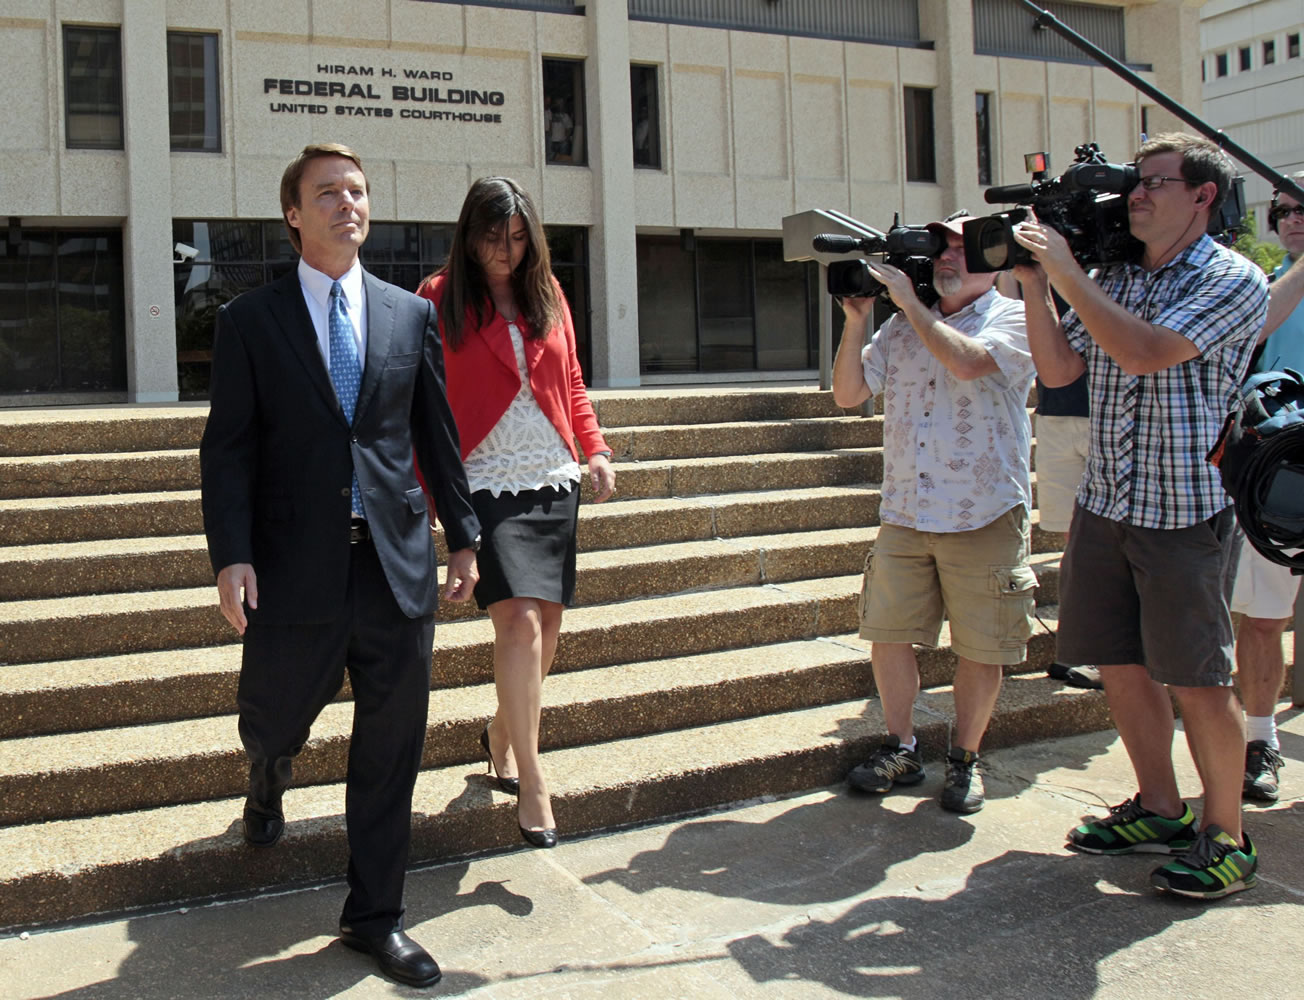 Former presidential candidate John Edwards is seen with his daughter Cate following a court appearance in Winston-Salem, N.C., Friday.